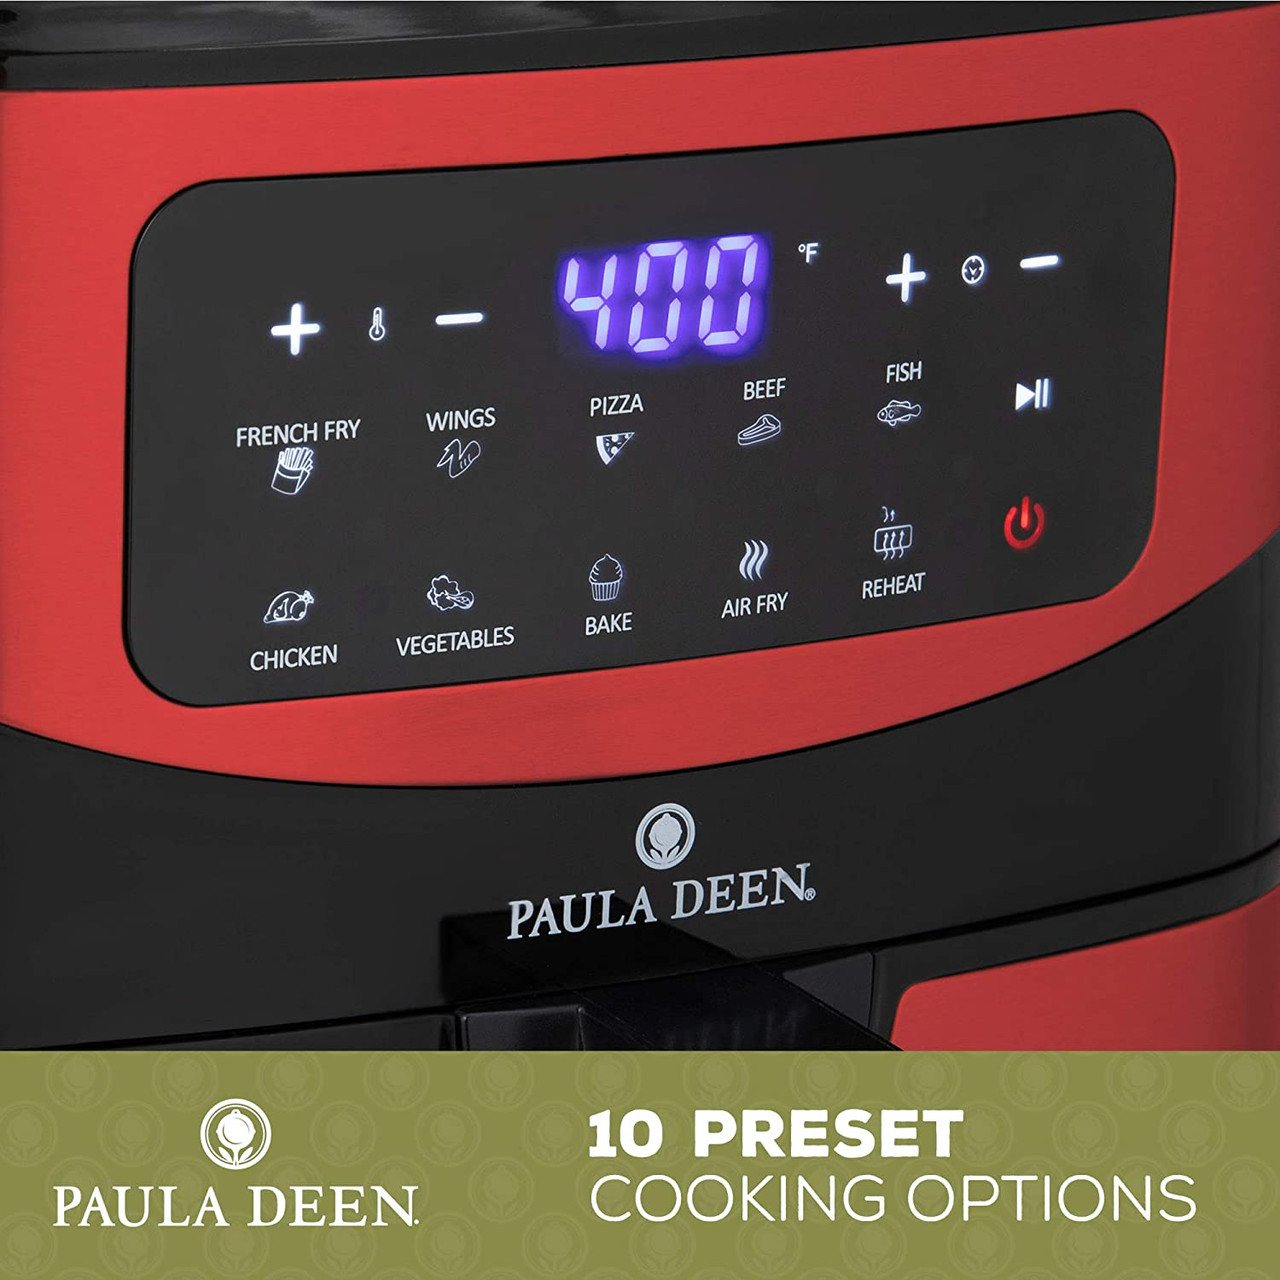 Paula Deen PDKDF579RR-RB Stainless Steel 10Qt Air Fryer, Red Stainless - Refurbished